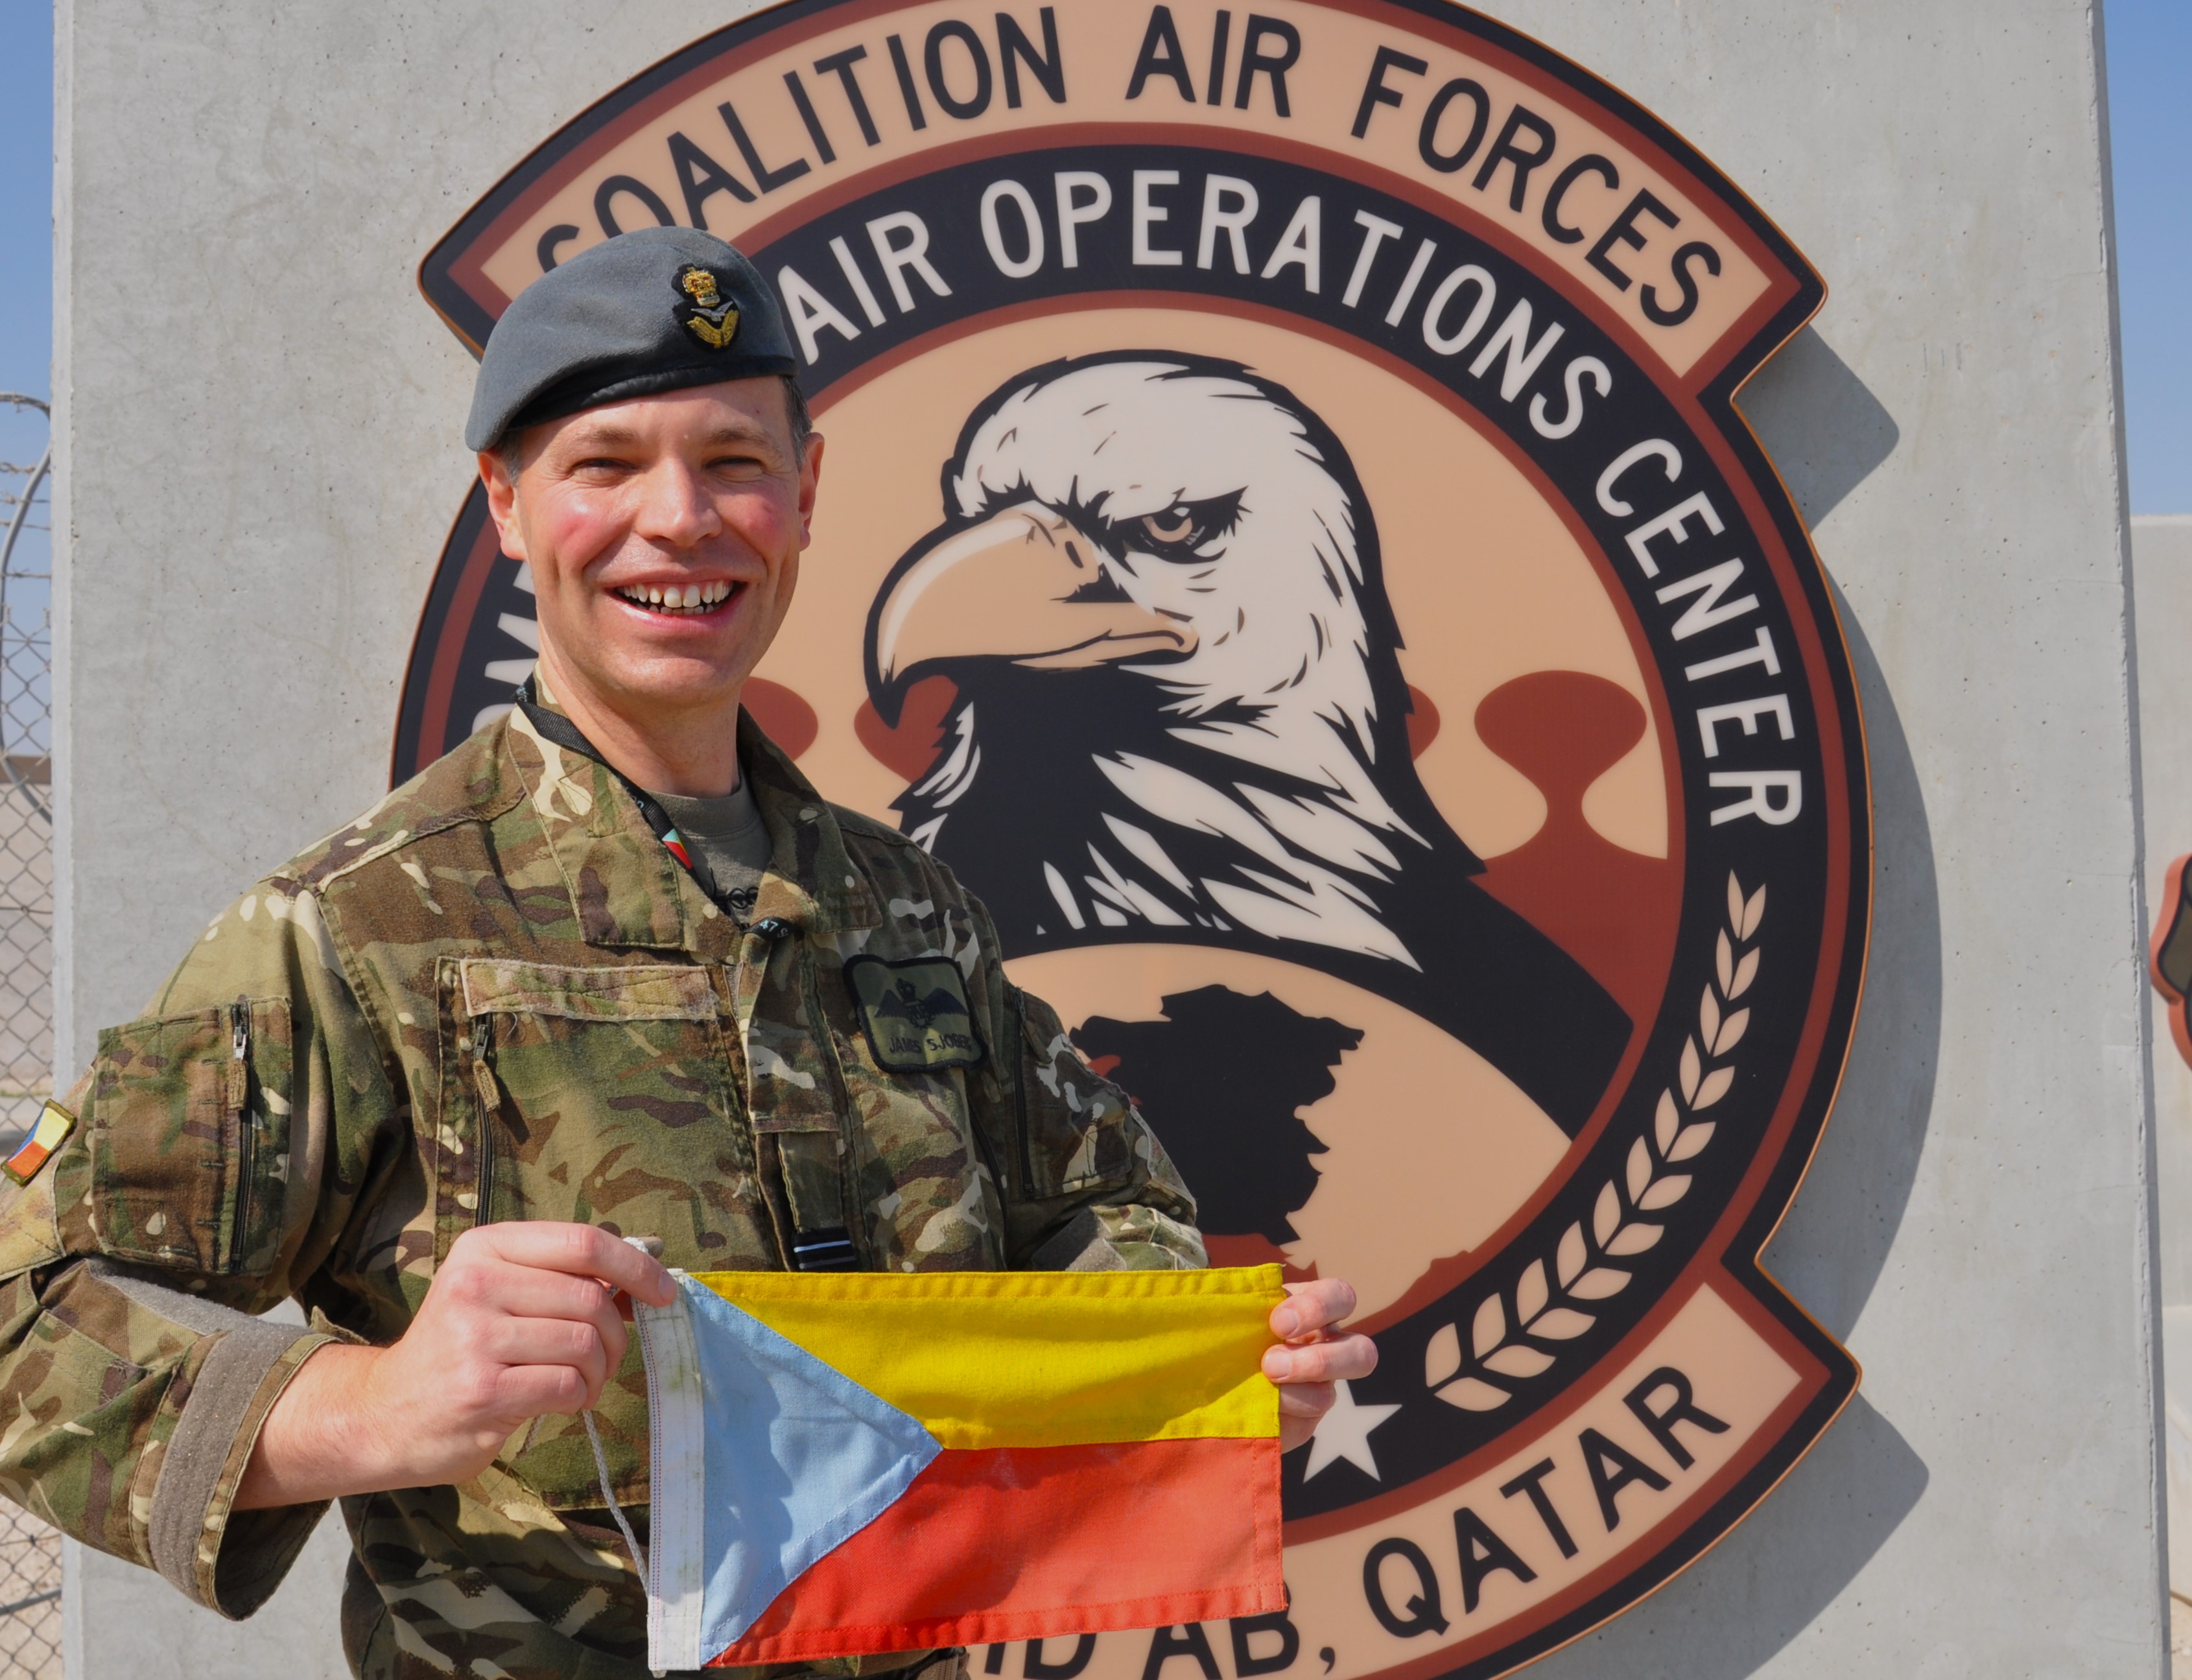 Wing Commander James Sjoberg, currently deployed as COS Ops at 83 EAG on OP Shader, with the 47 Squadron tricolour flag.